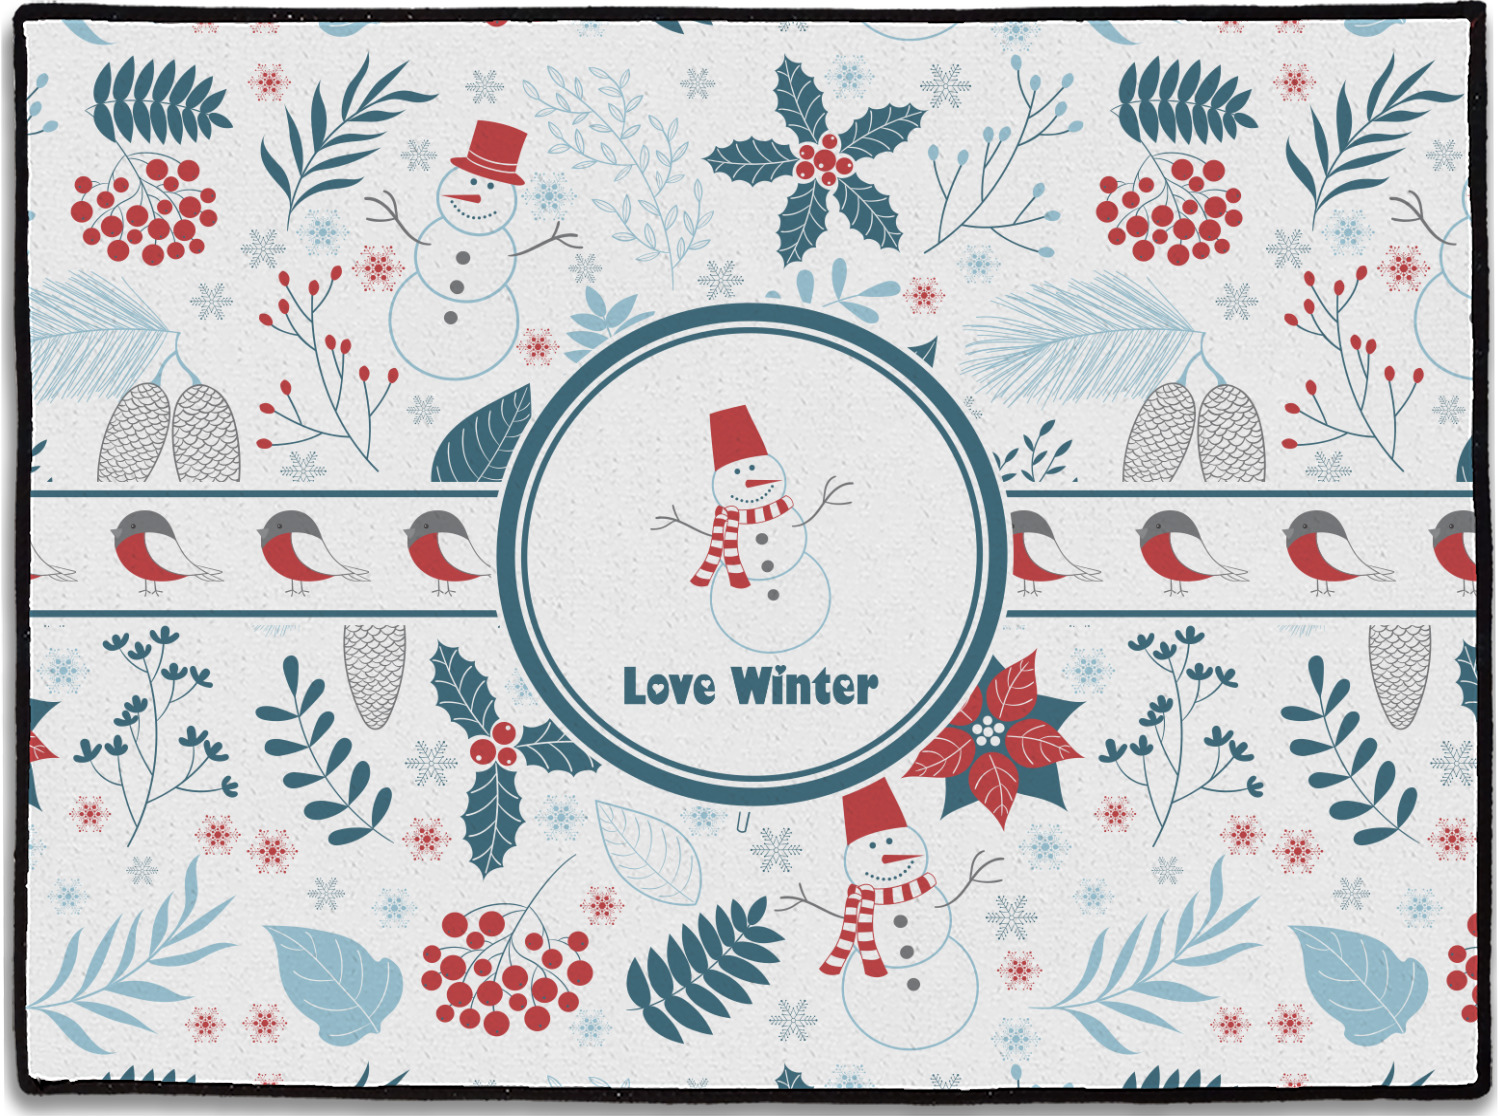 https://www.youcustomizeit.com/common/MAKE/519037/Winter-Personalized-Door-Mat-24x18-APPROVAL.jpg?lm=1601052017